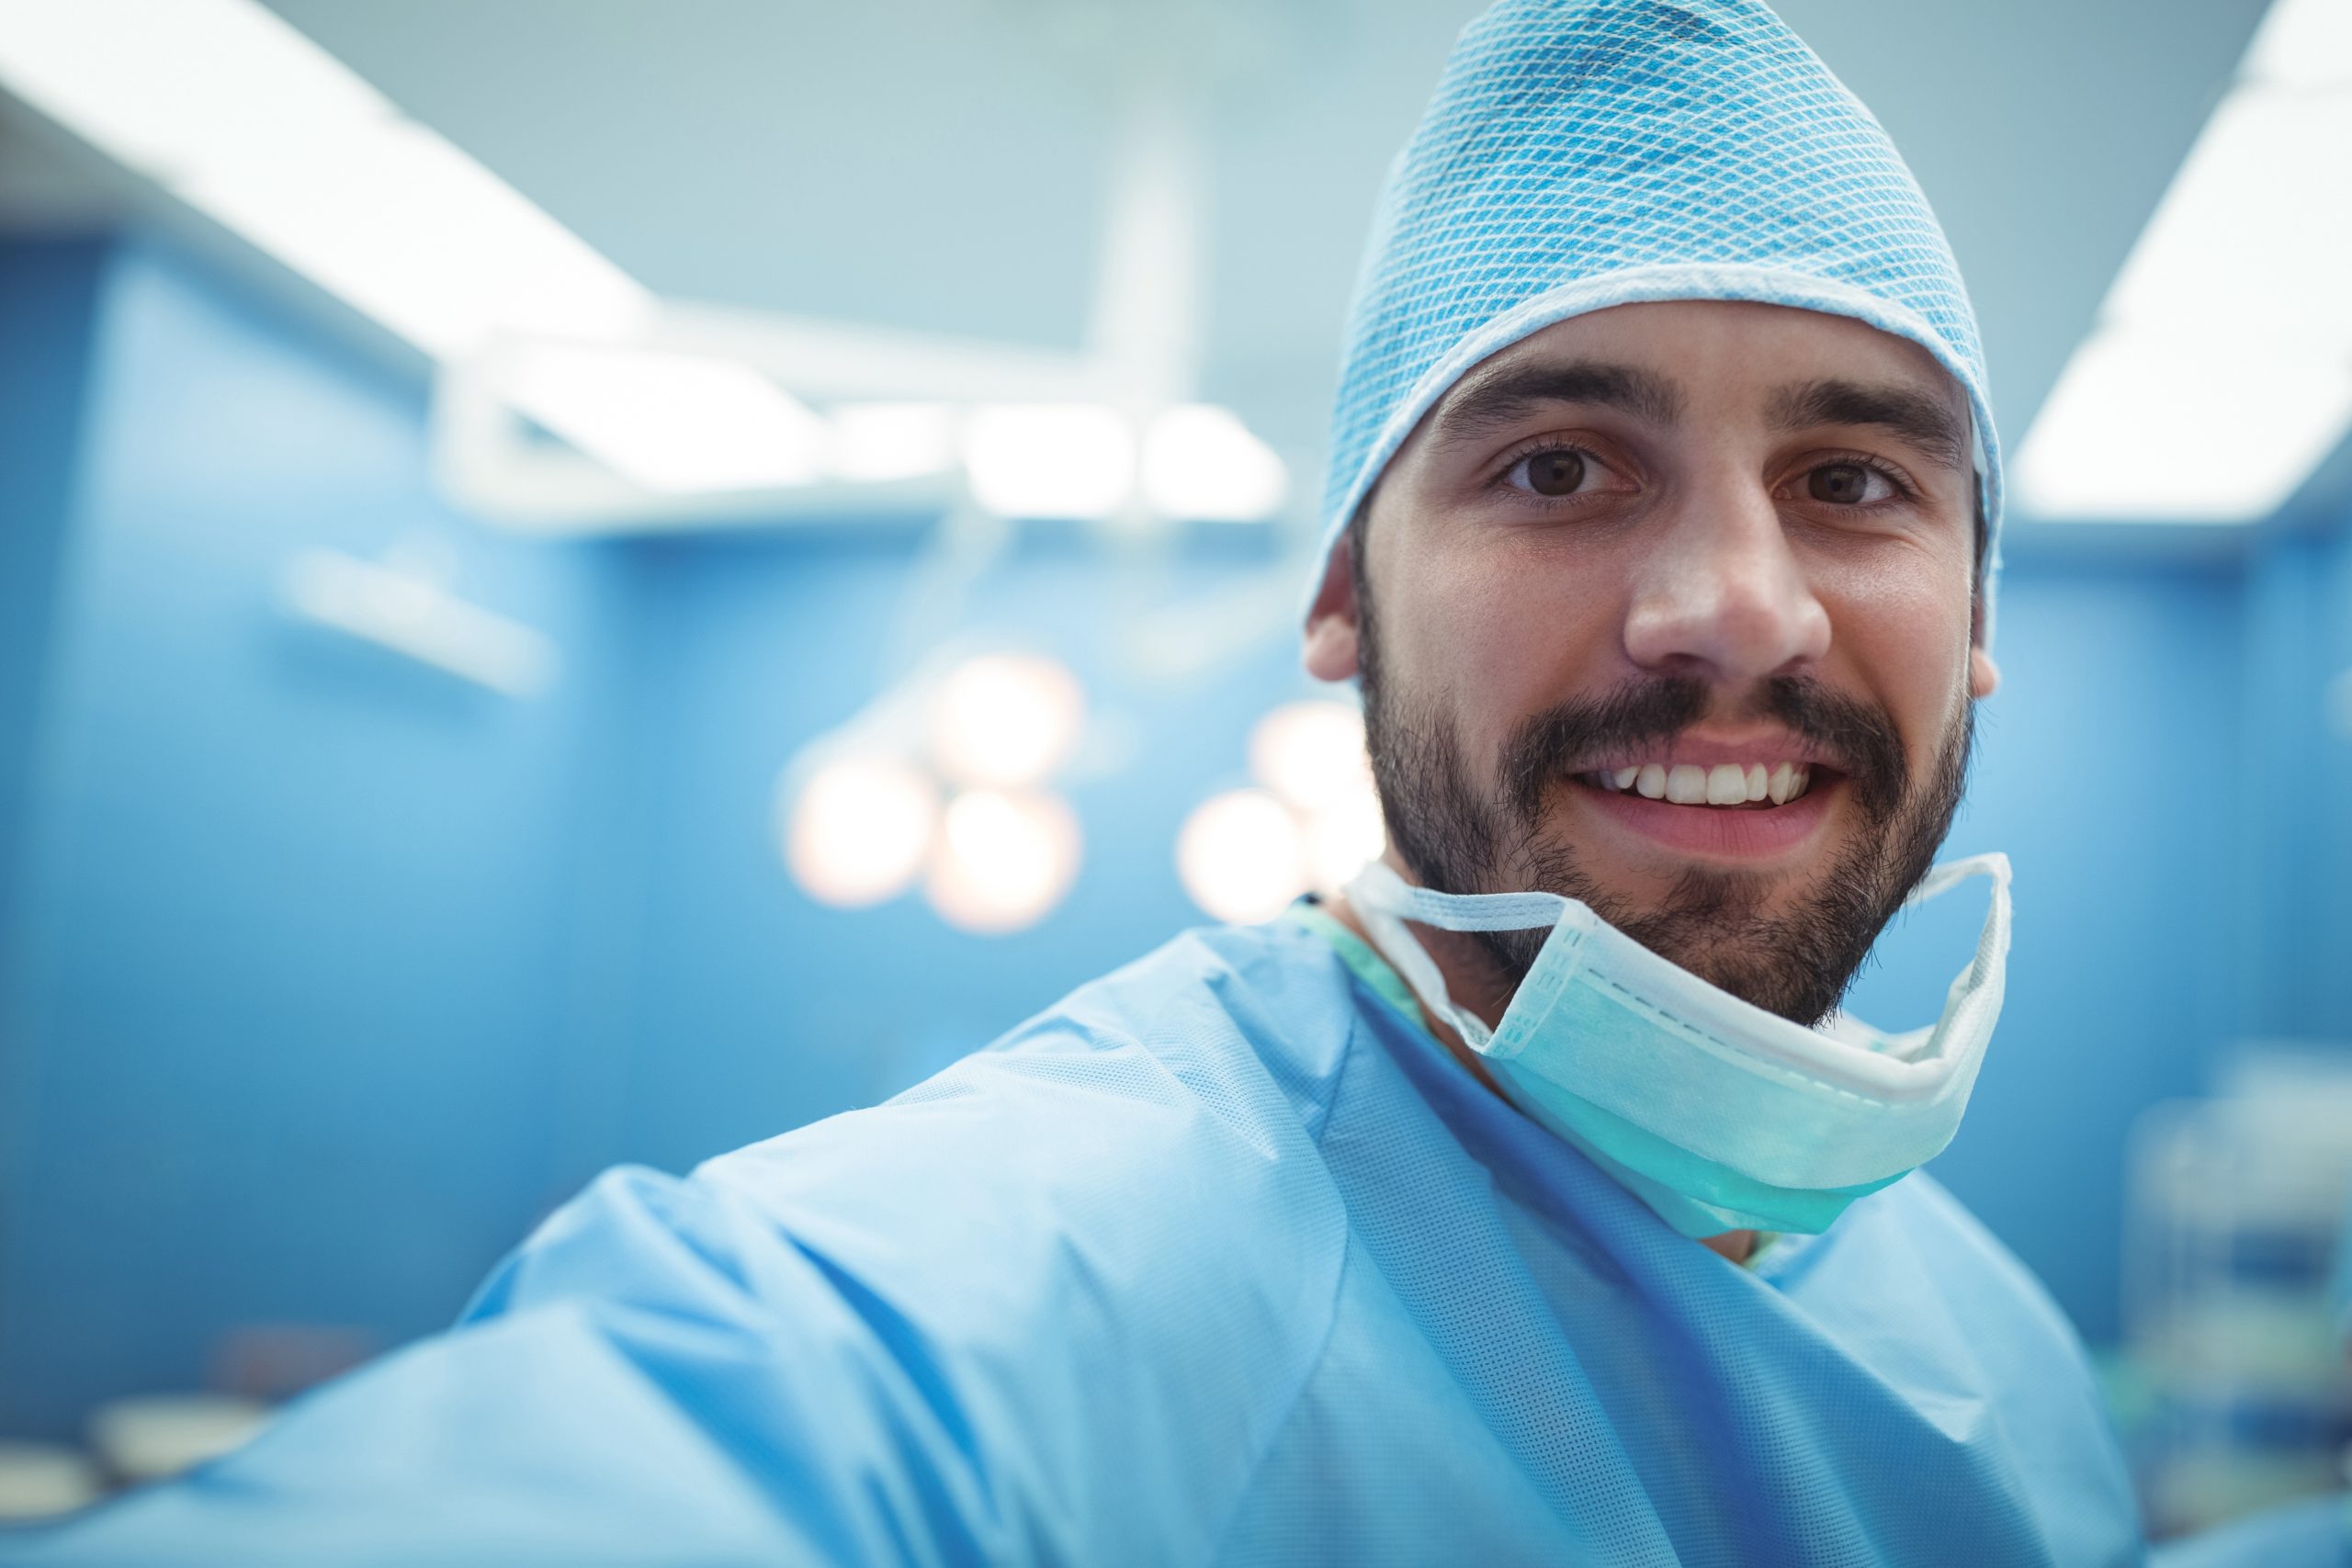 male surgeon smiling happily because of an optimized surgical room